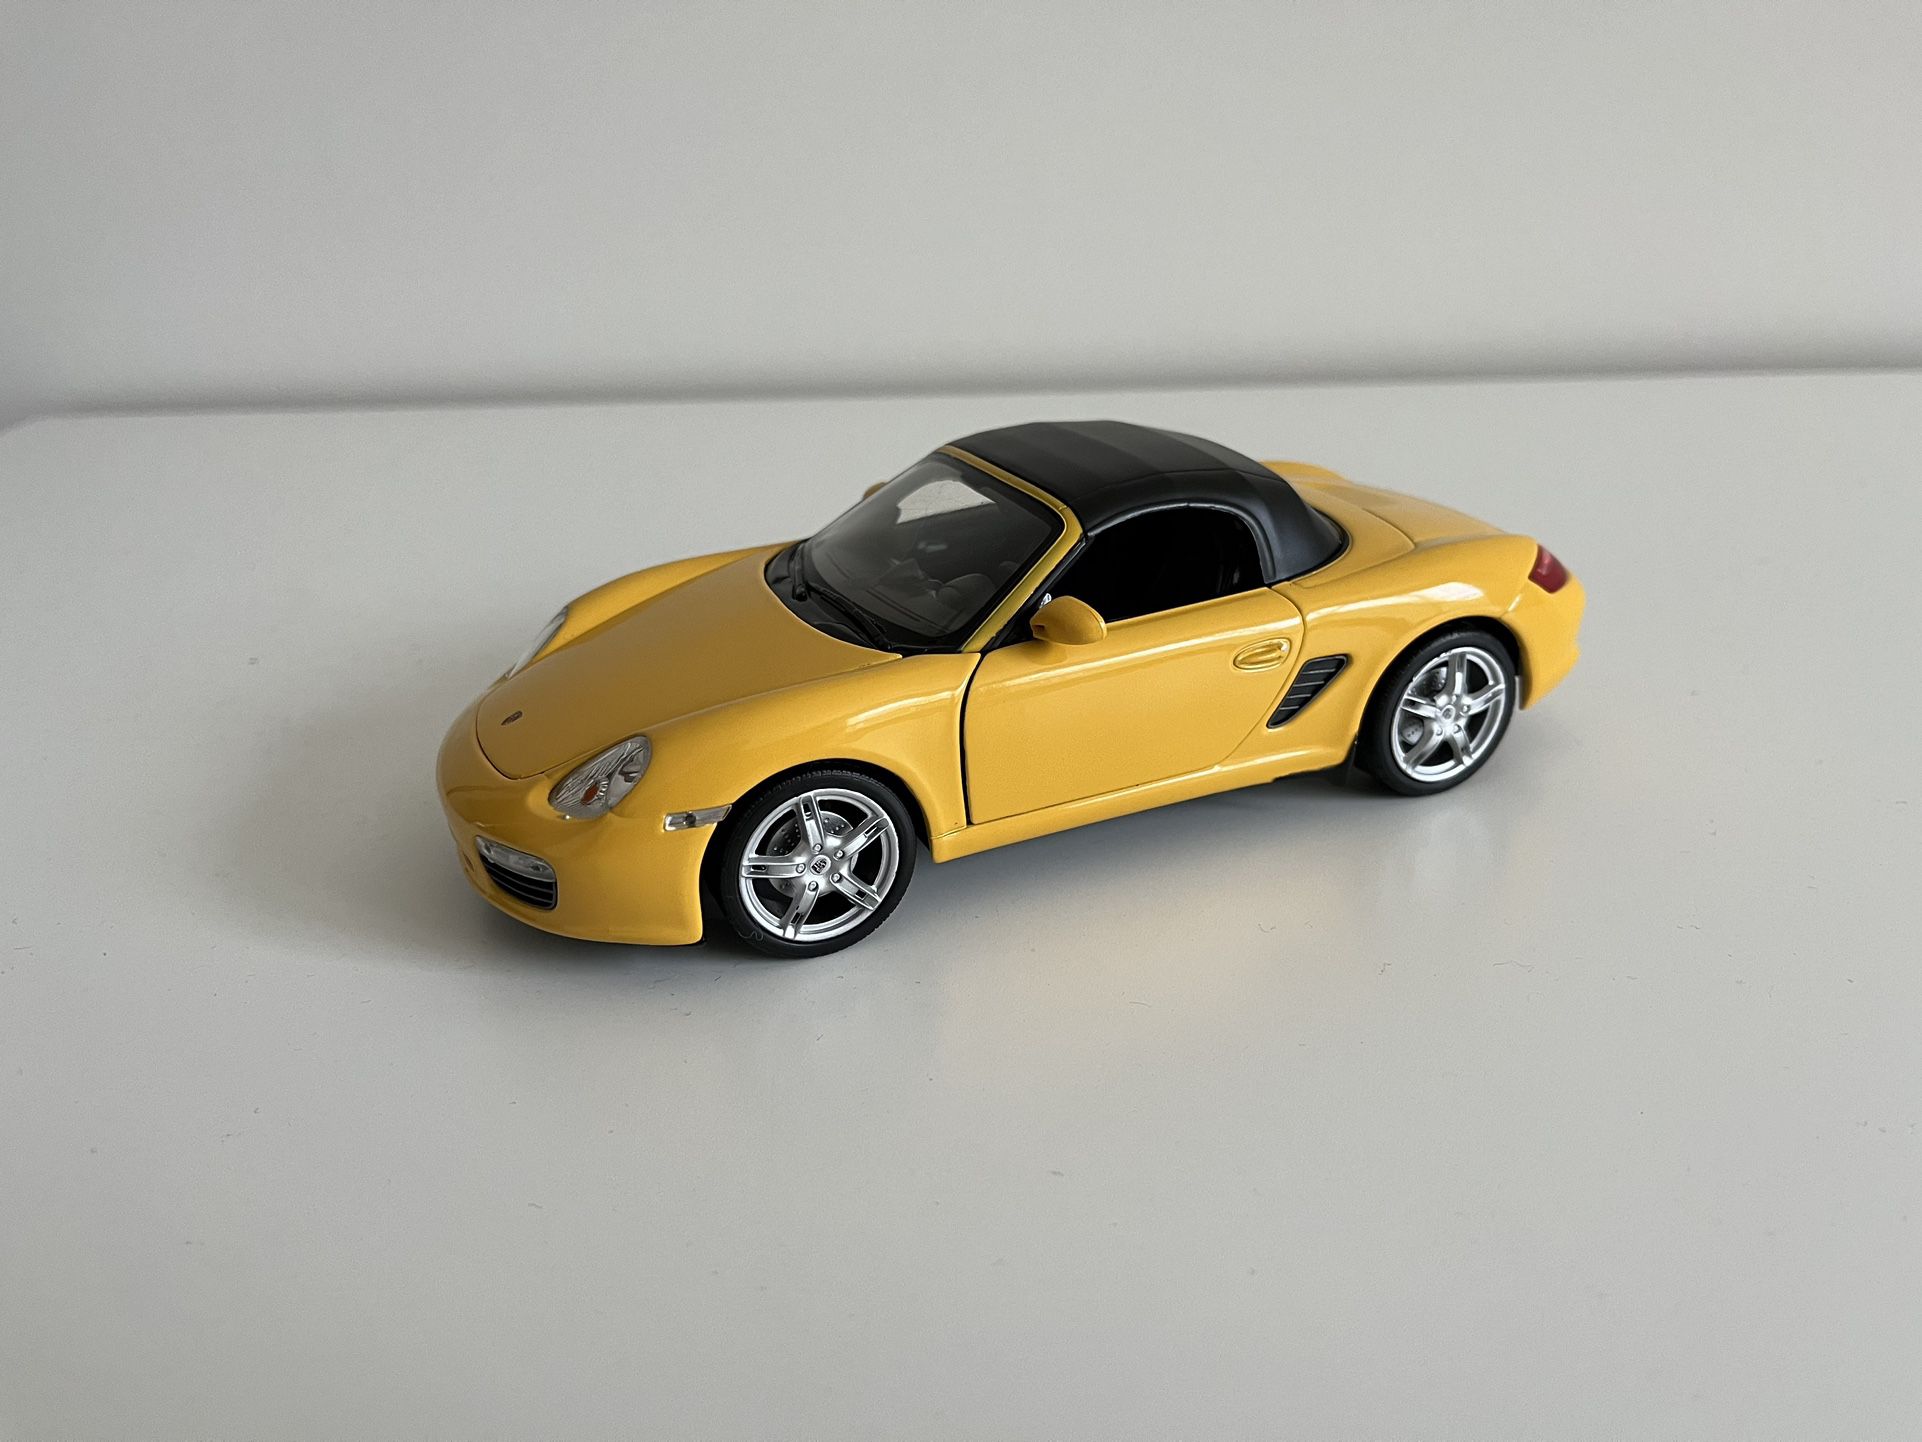 WELLY PORSCHE BOXSTER S (Scale 1/24 (Toy Car))